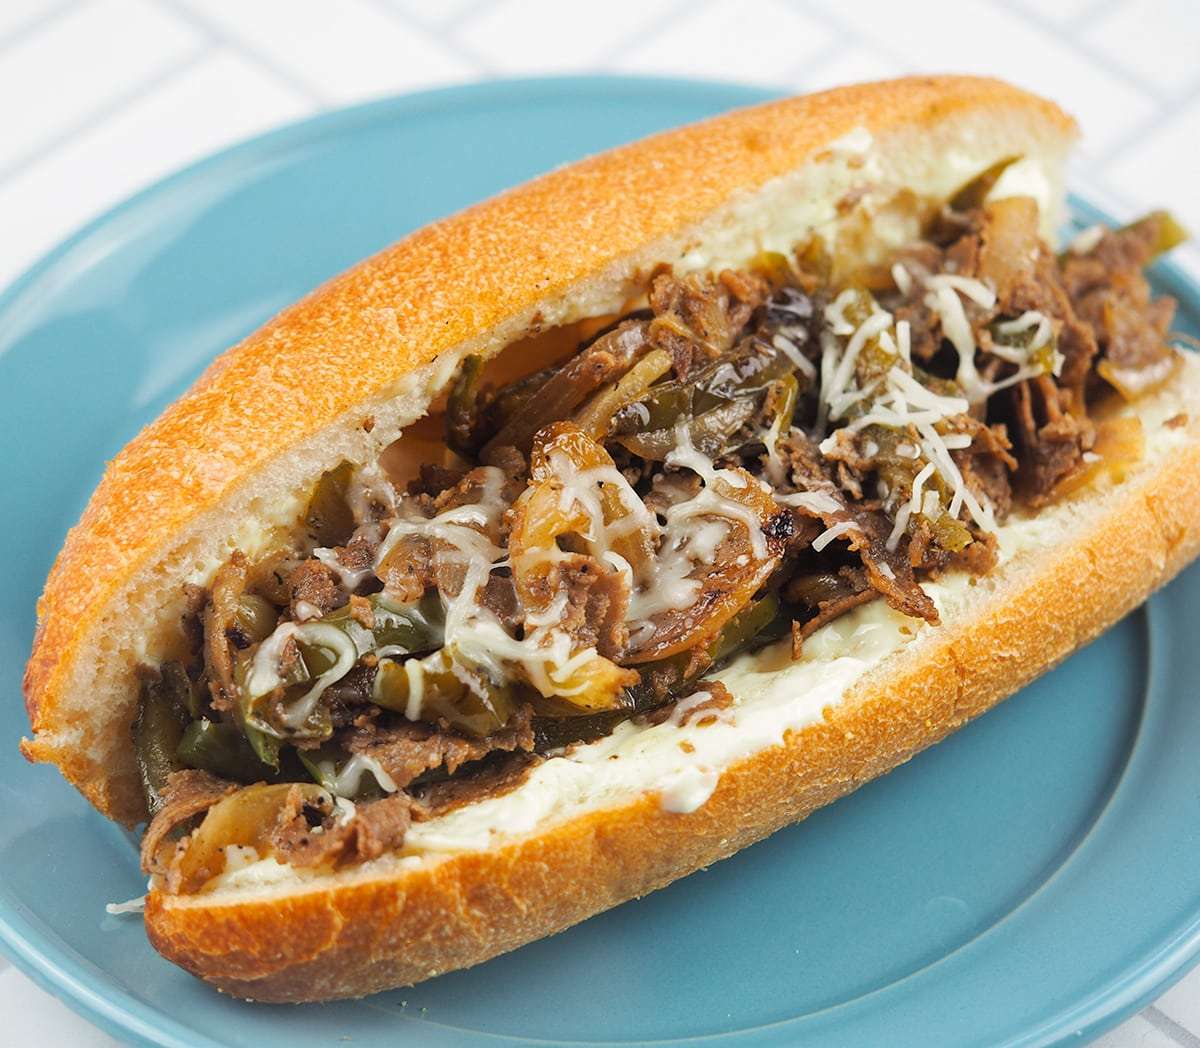 Cheesesteak on a blue plate.